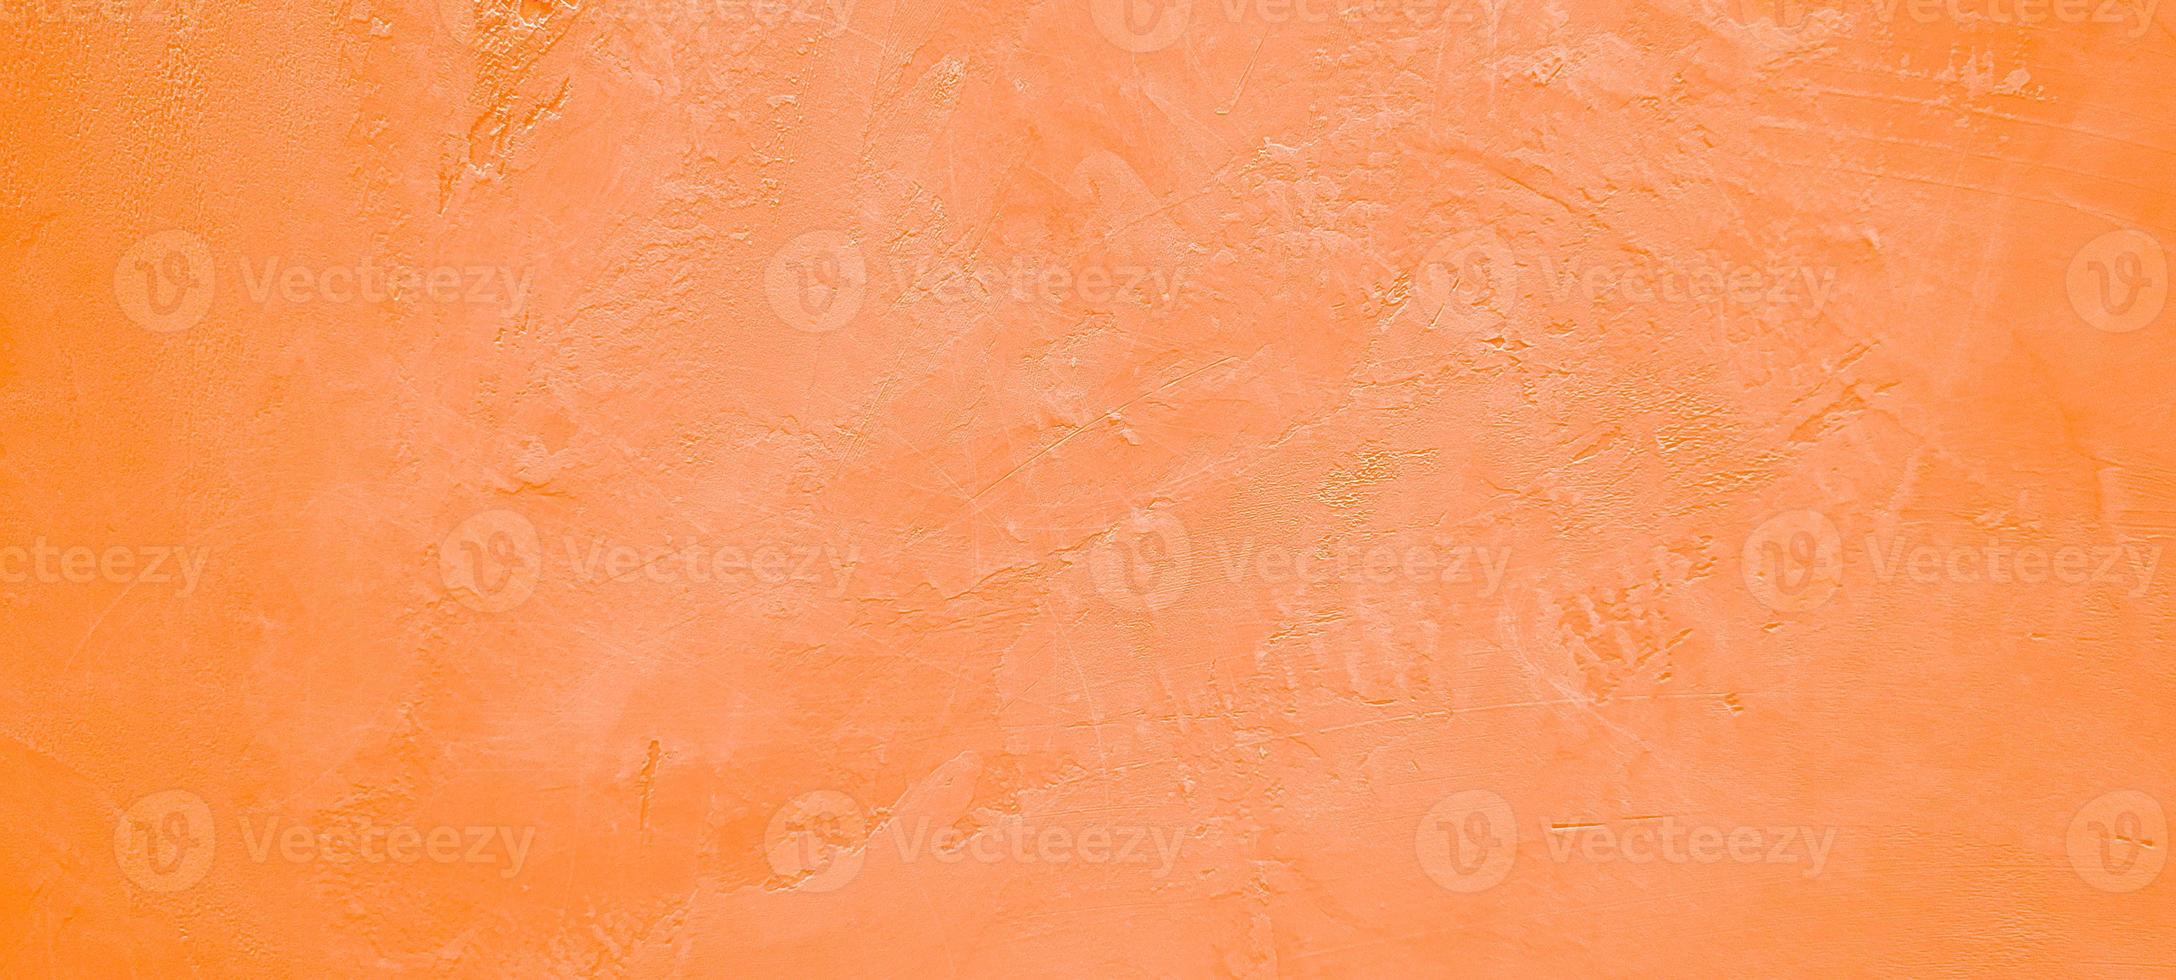 terracotta orange background with texture and shaded gradient photo